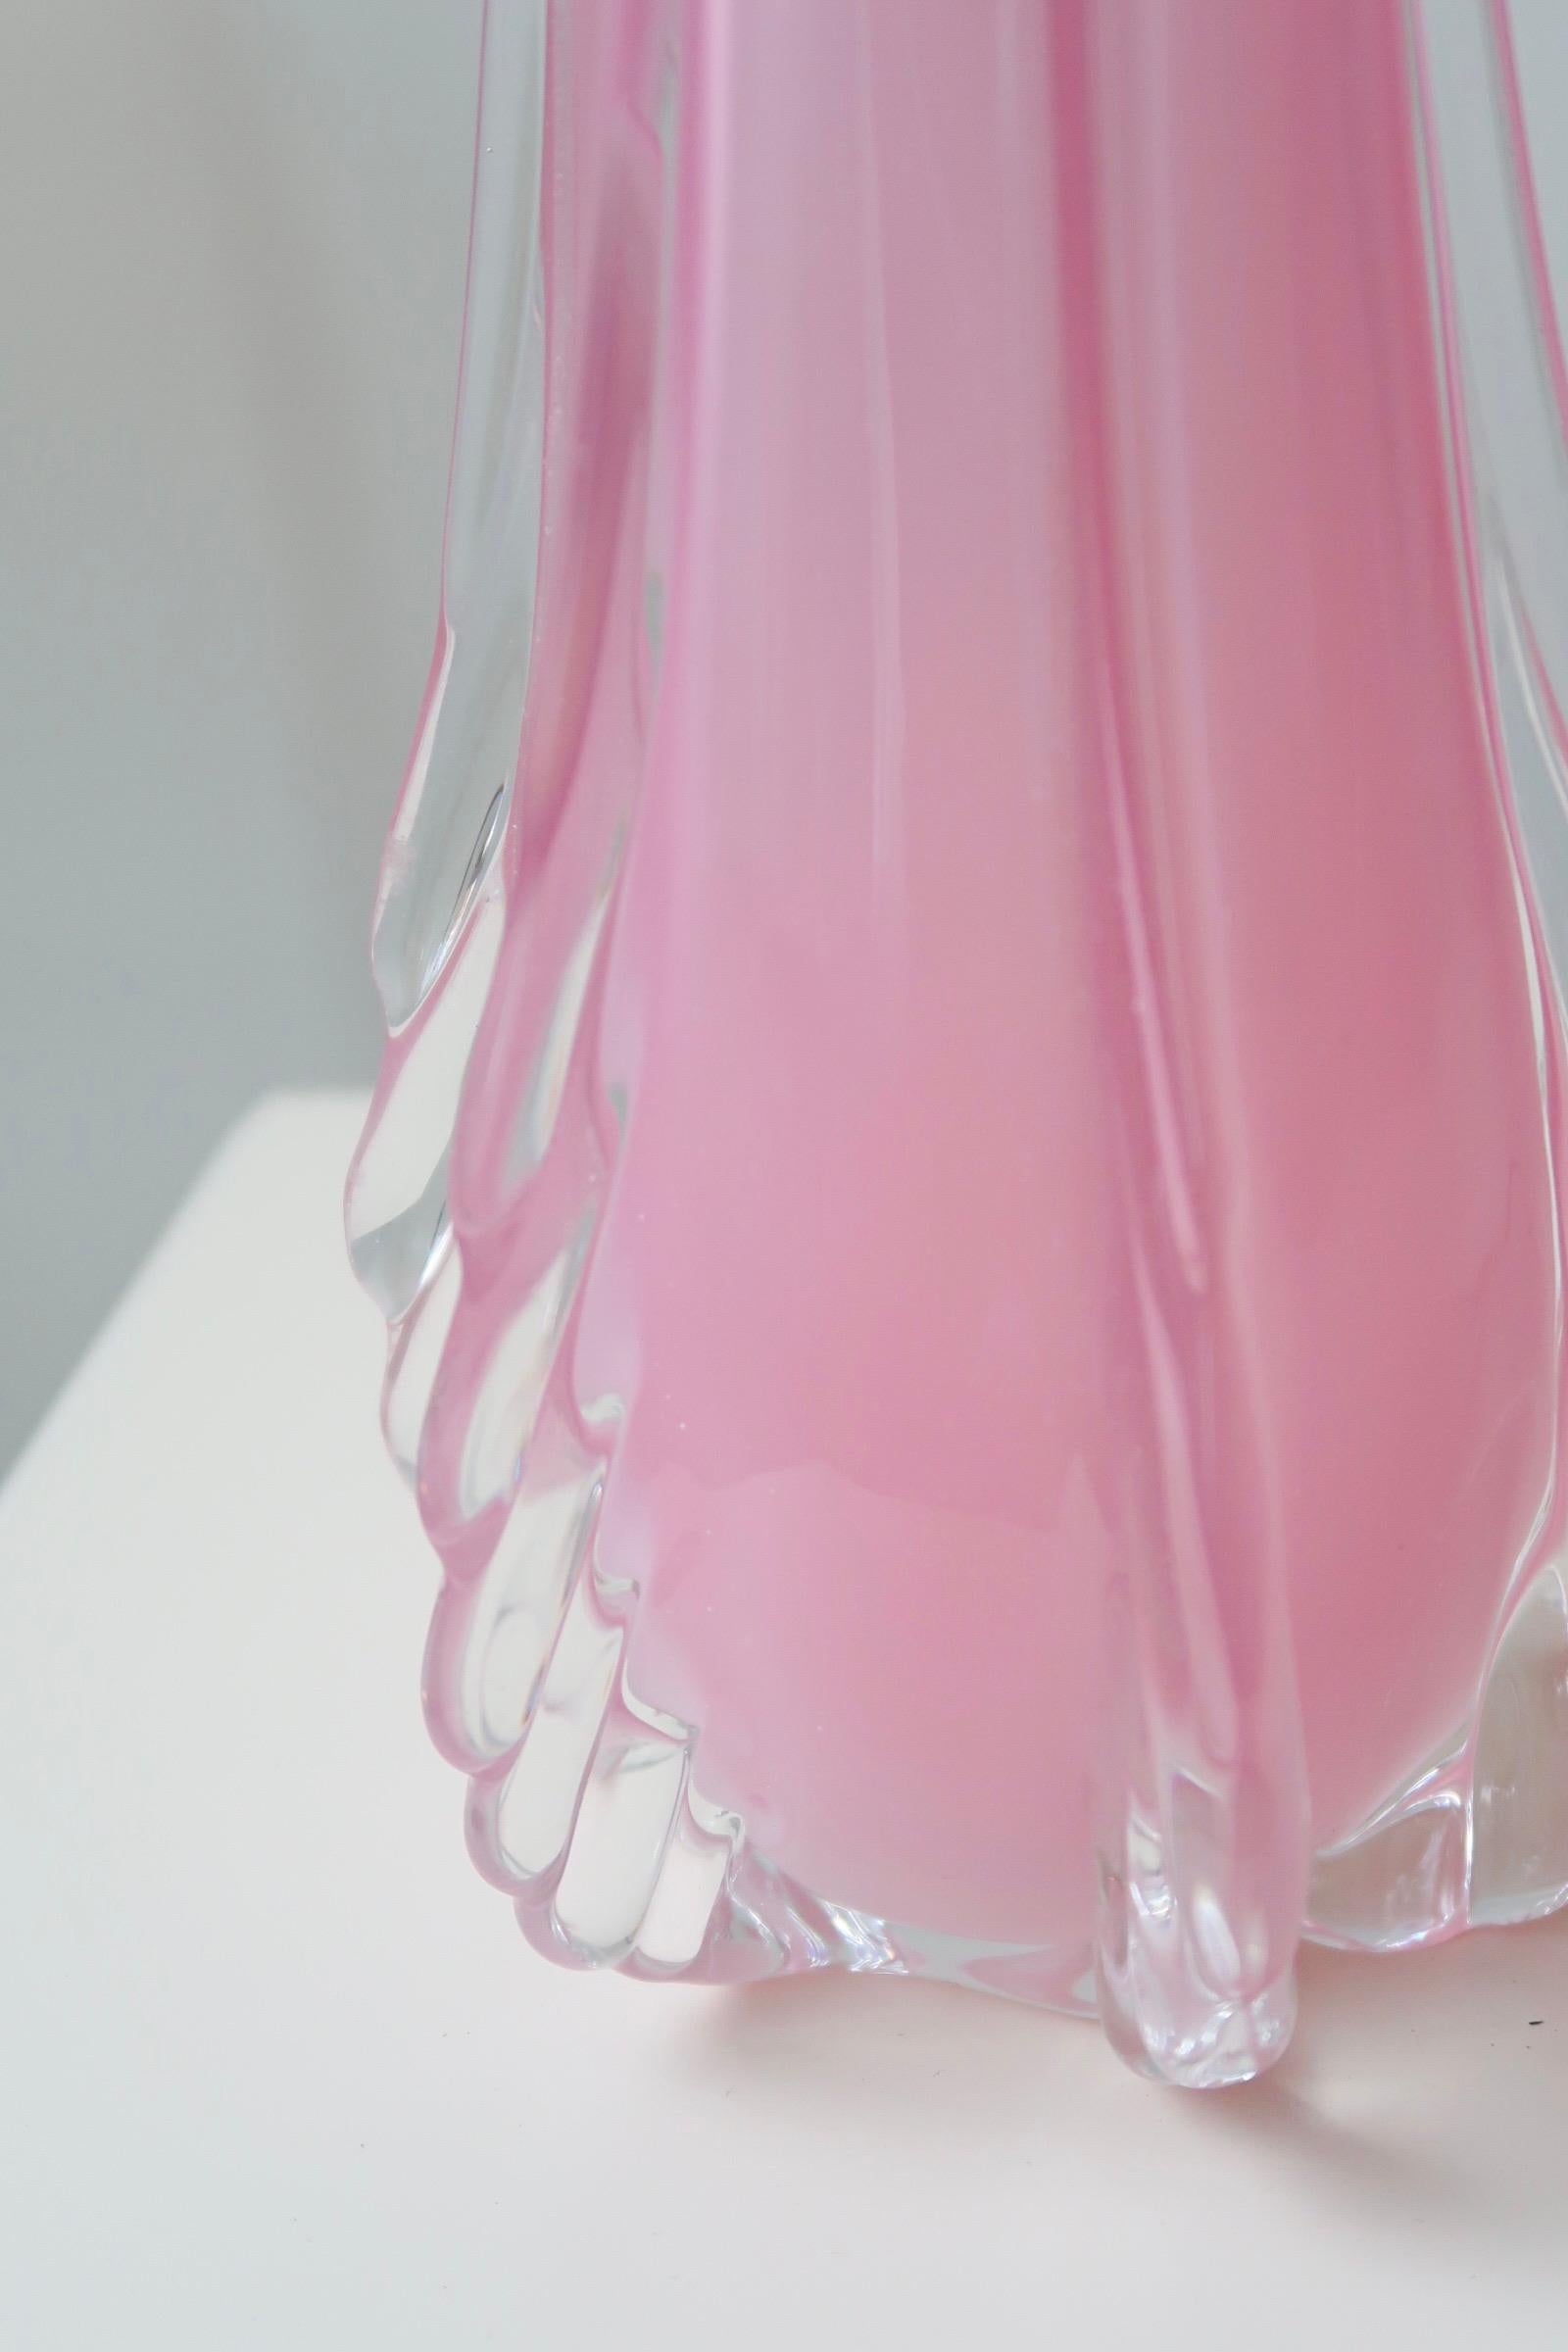 Large Vintage Murano Pink Ribbed Alabastro Opal Vase Mouth Blown Italian 1960s For Sale 1